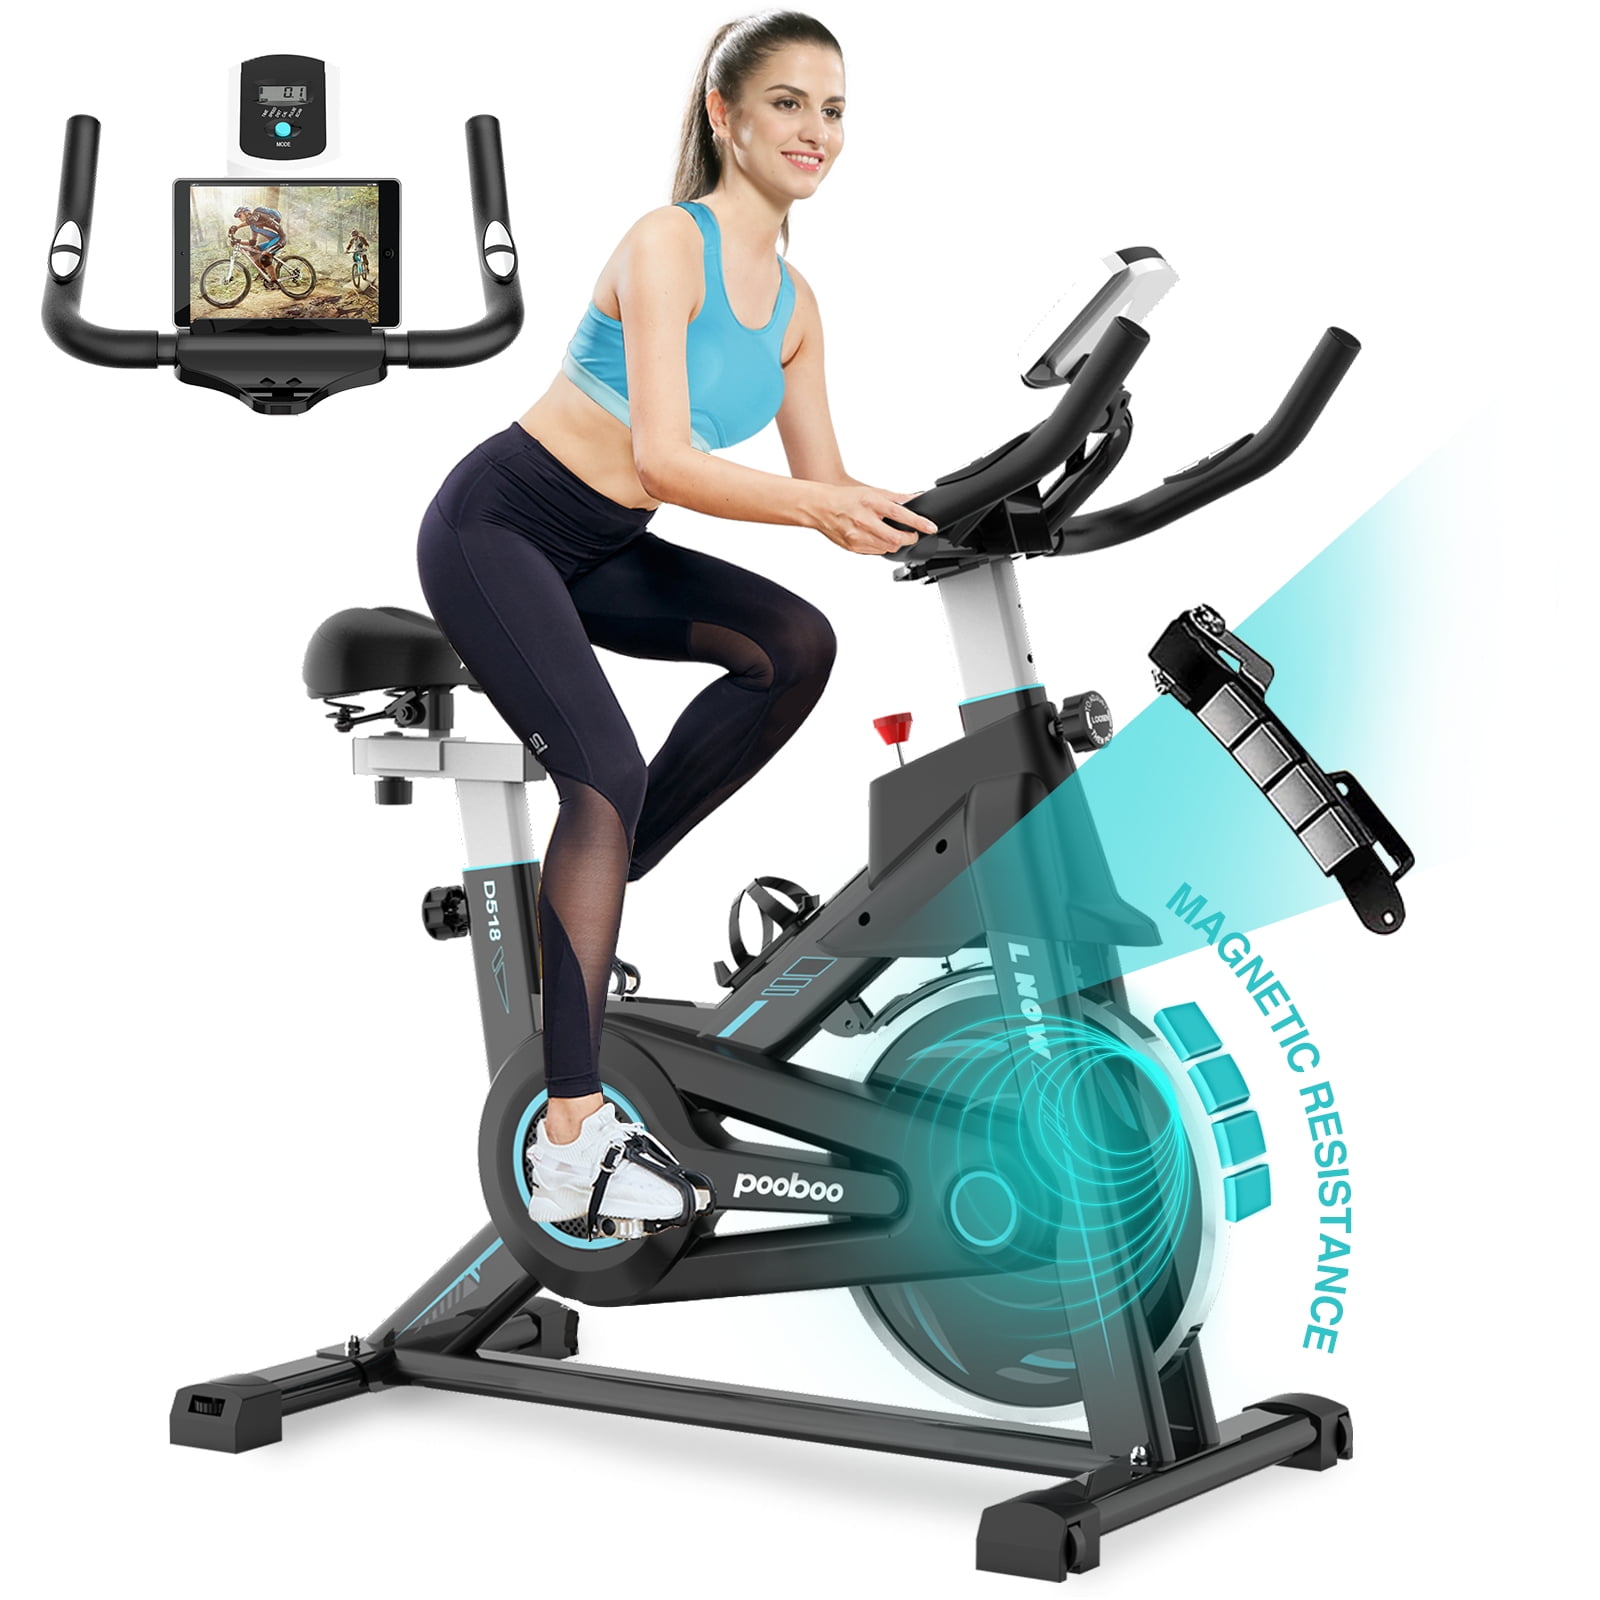 Details about   ANCHEER Fitness Double Pedal Exercise Bike Magnetic Resistance Trainer Sport 